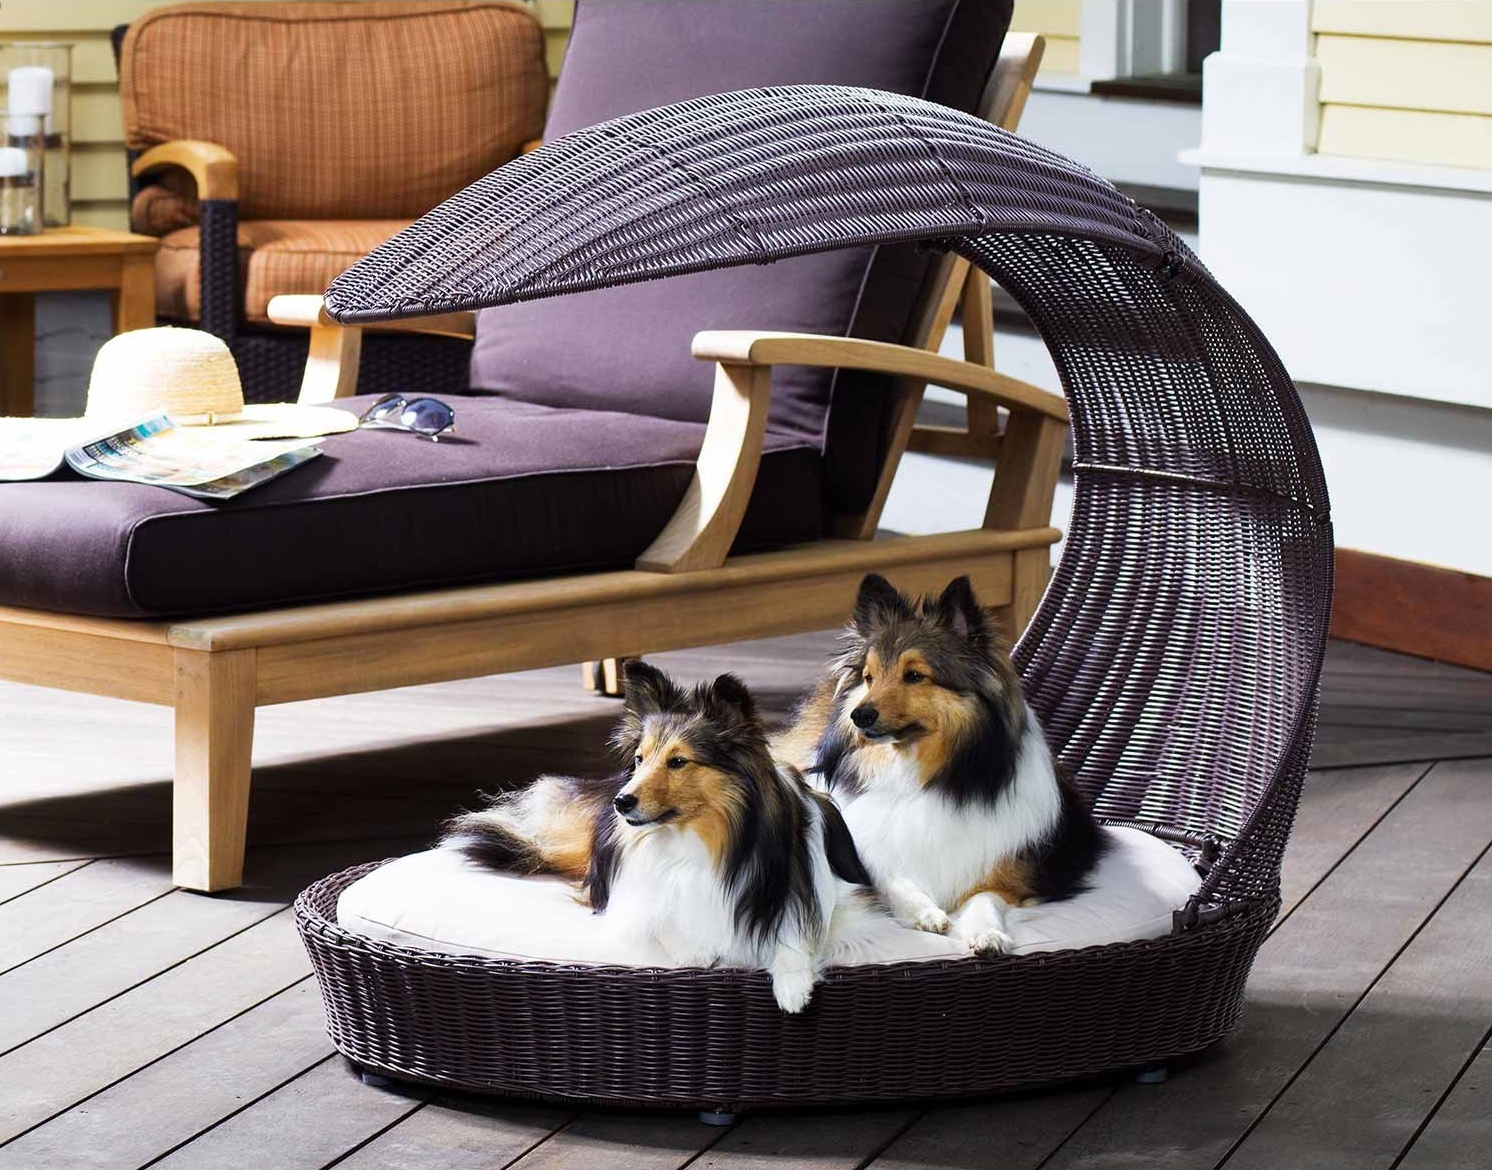 12 Beautiful Dog Beds That Will Instantly Enhance Your Home's Decor